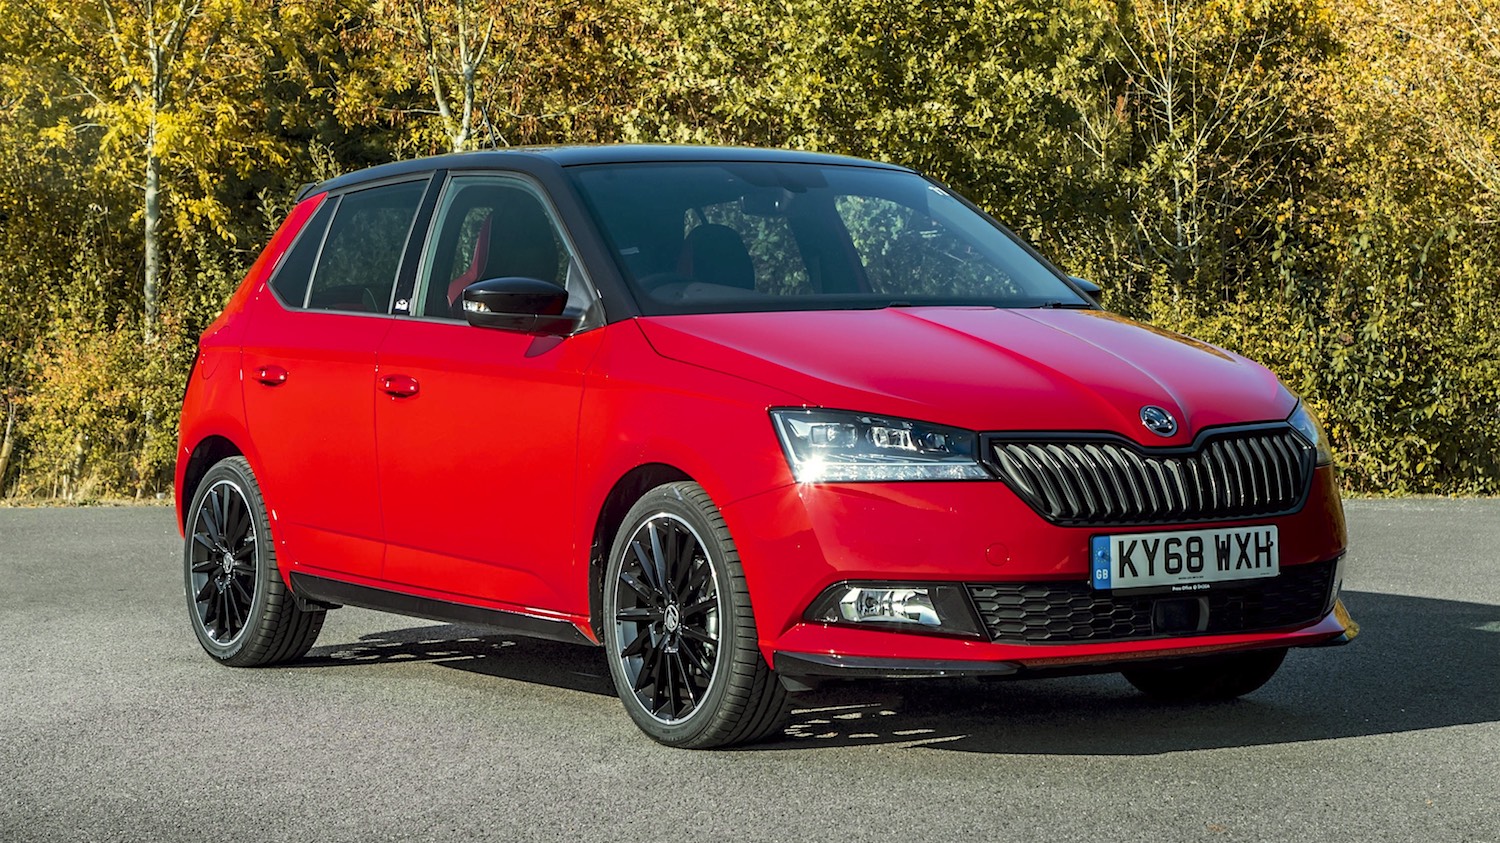 Tim Barnes Clay reviews the upated Skoda Fabia Monte Carlo for drive 18